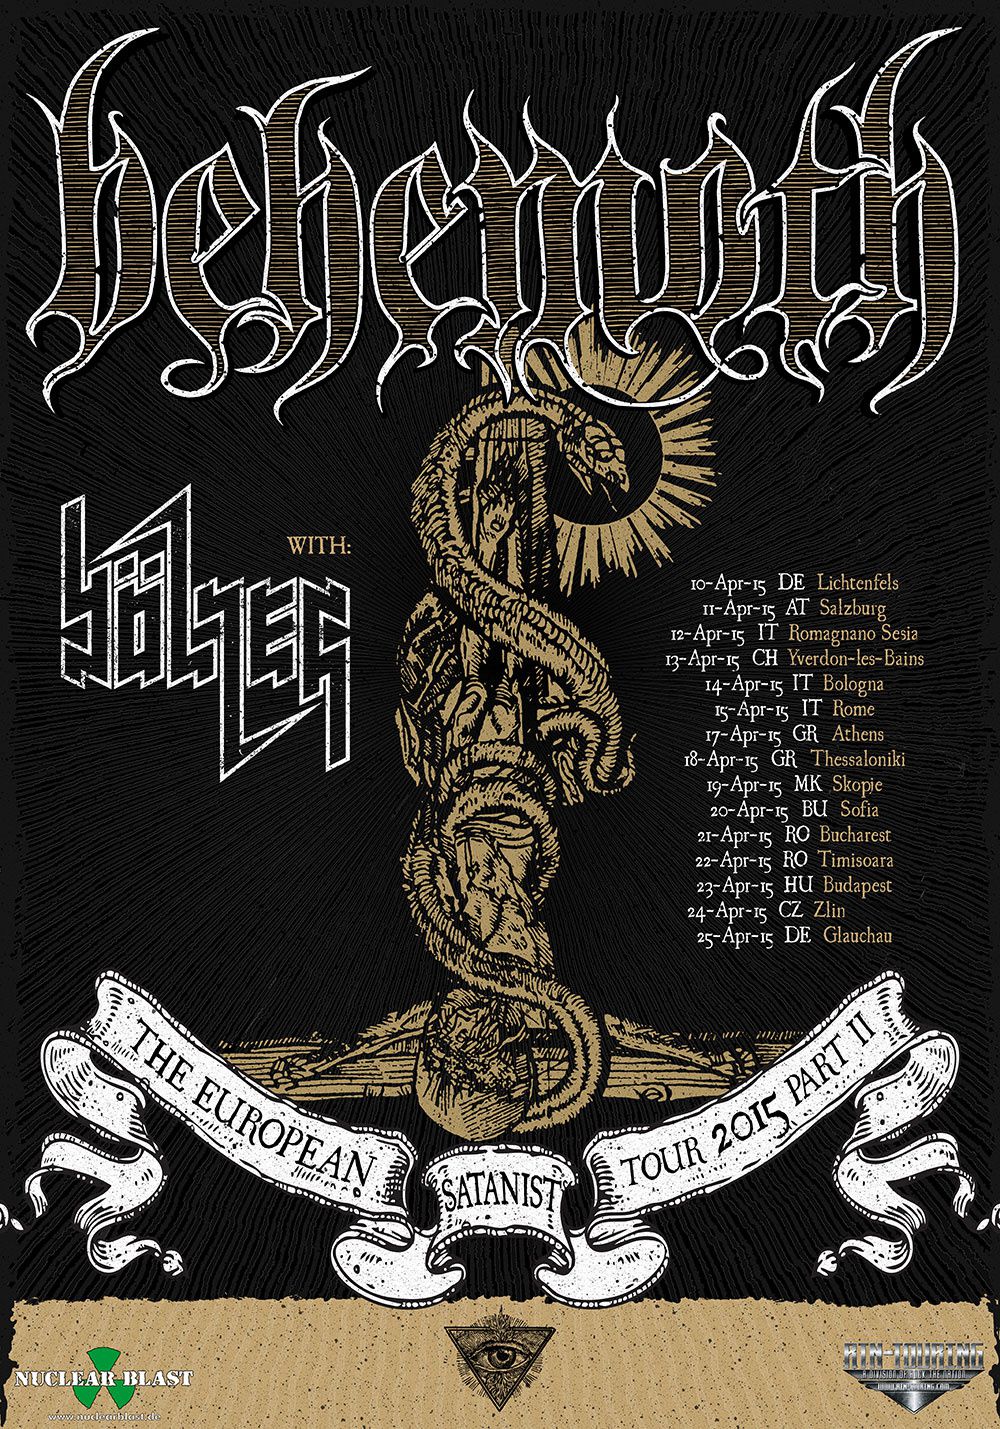 BEHEMOTH on tour in Europe with BÖLZER